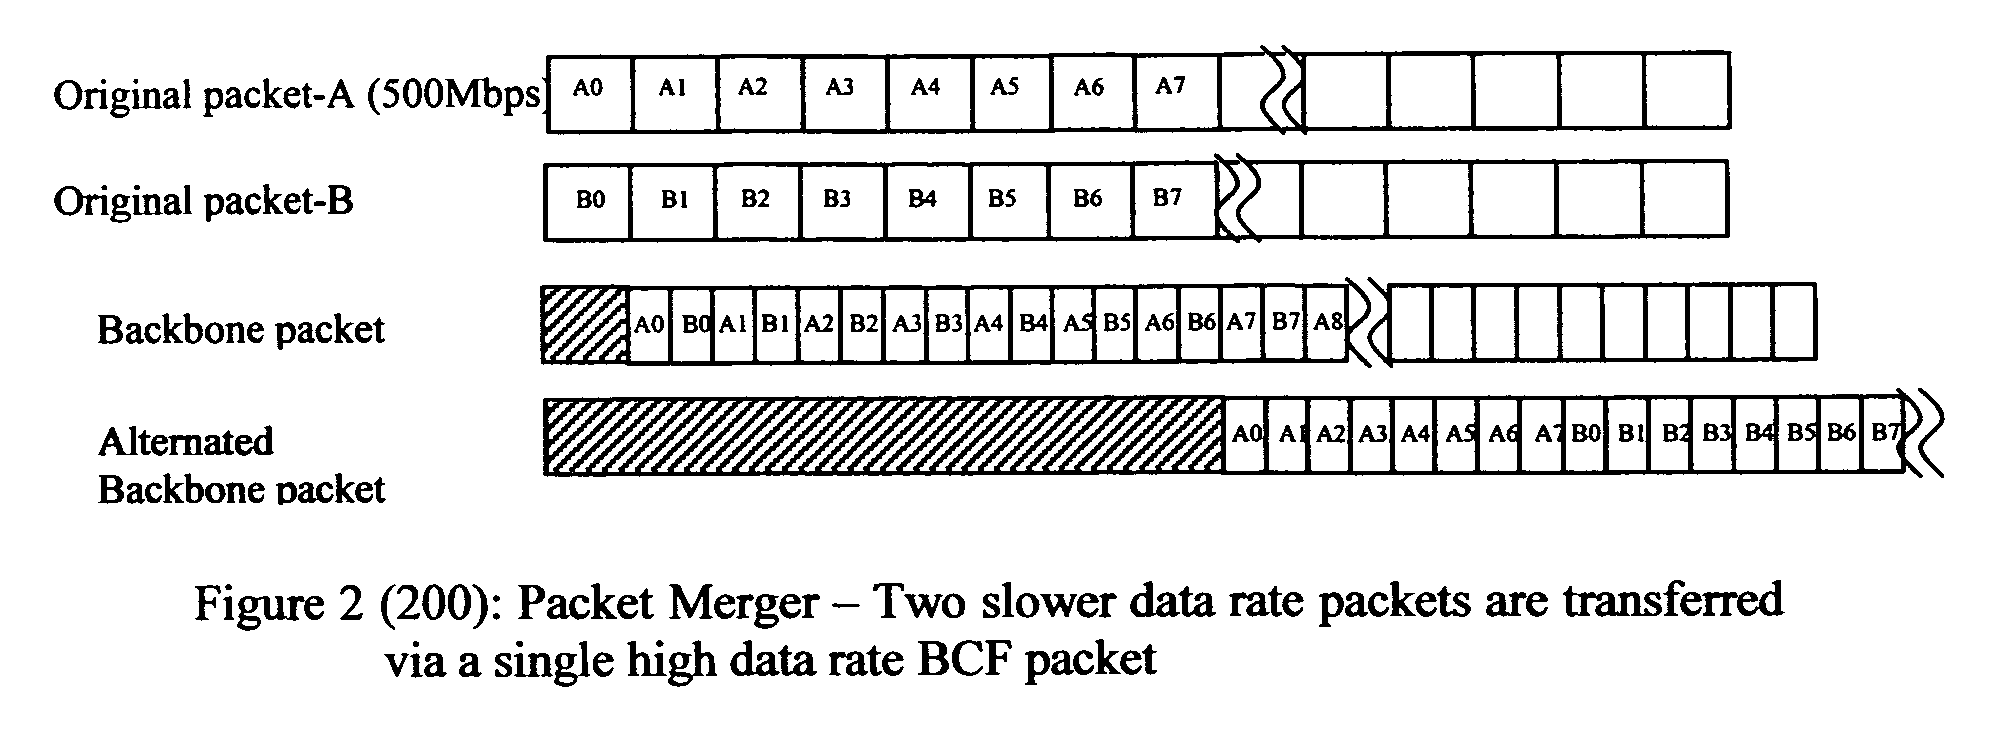 Method of constructing wireless high speed backbone connection that unifies various wired/wireless network clusters by means of employing the smart/adaptive antenna technique and dynamically creating concurrent data pipelines